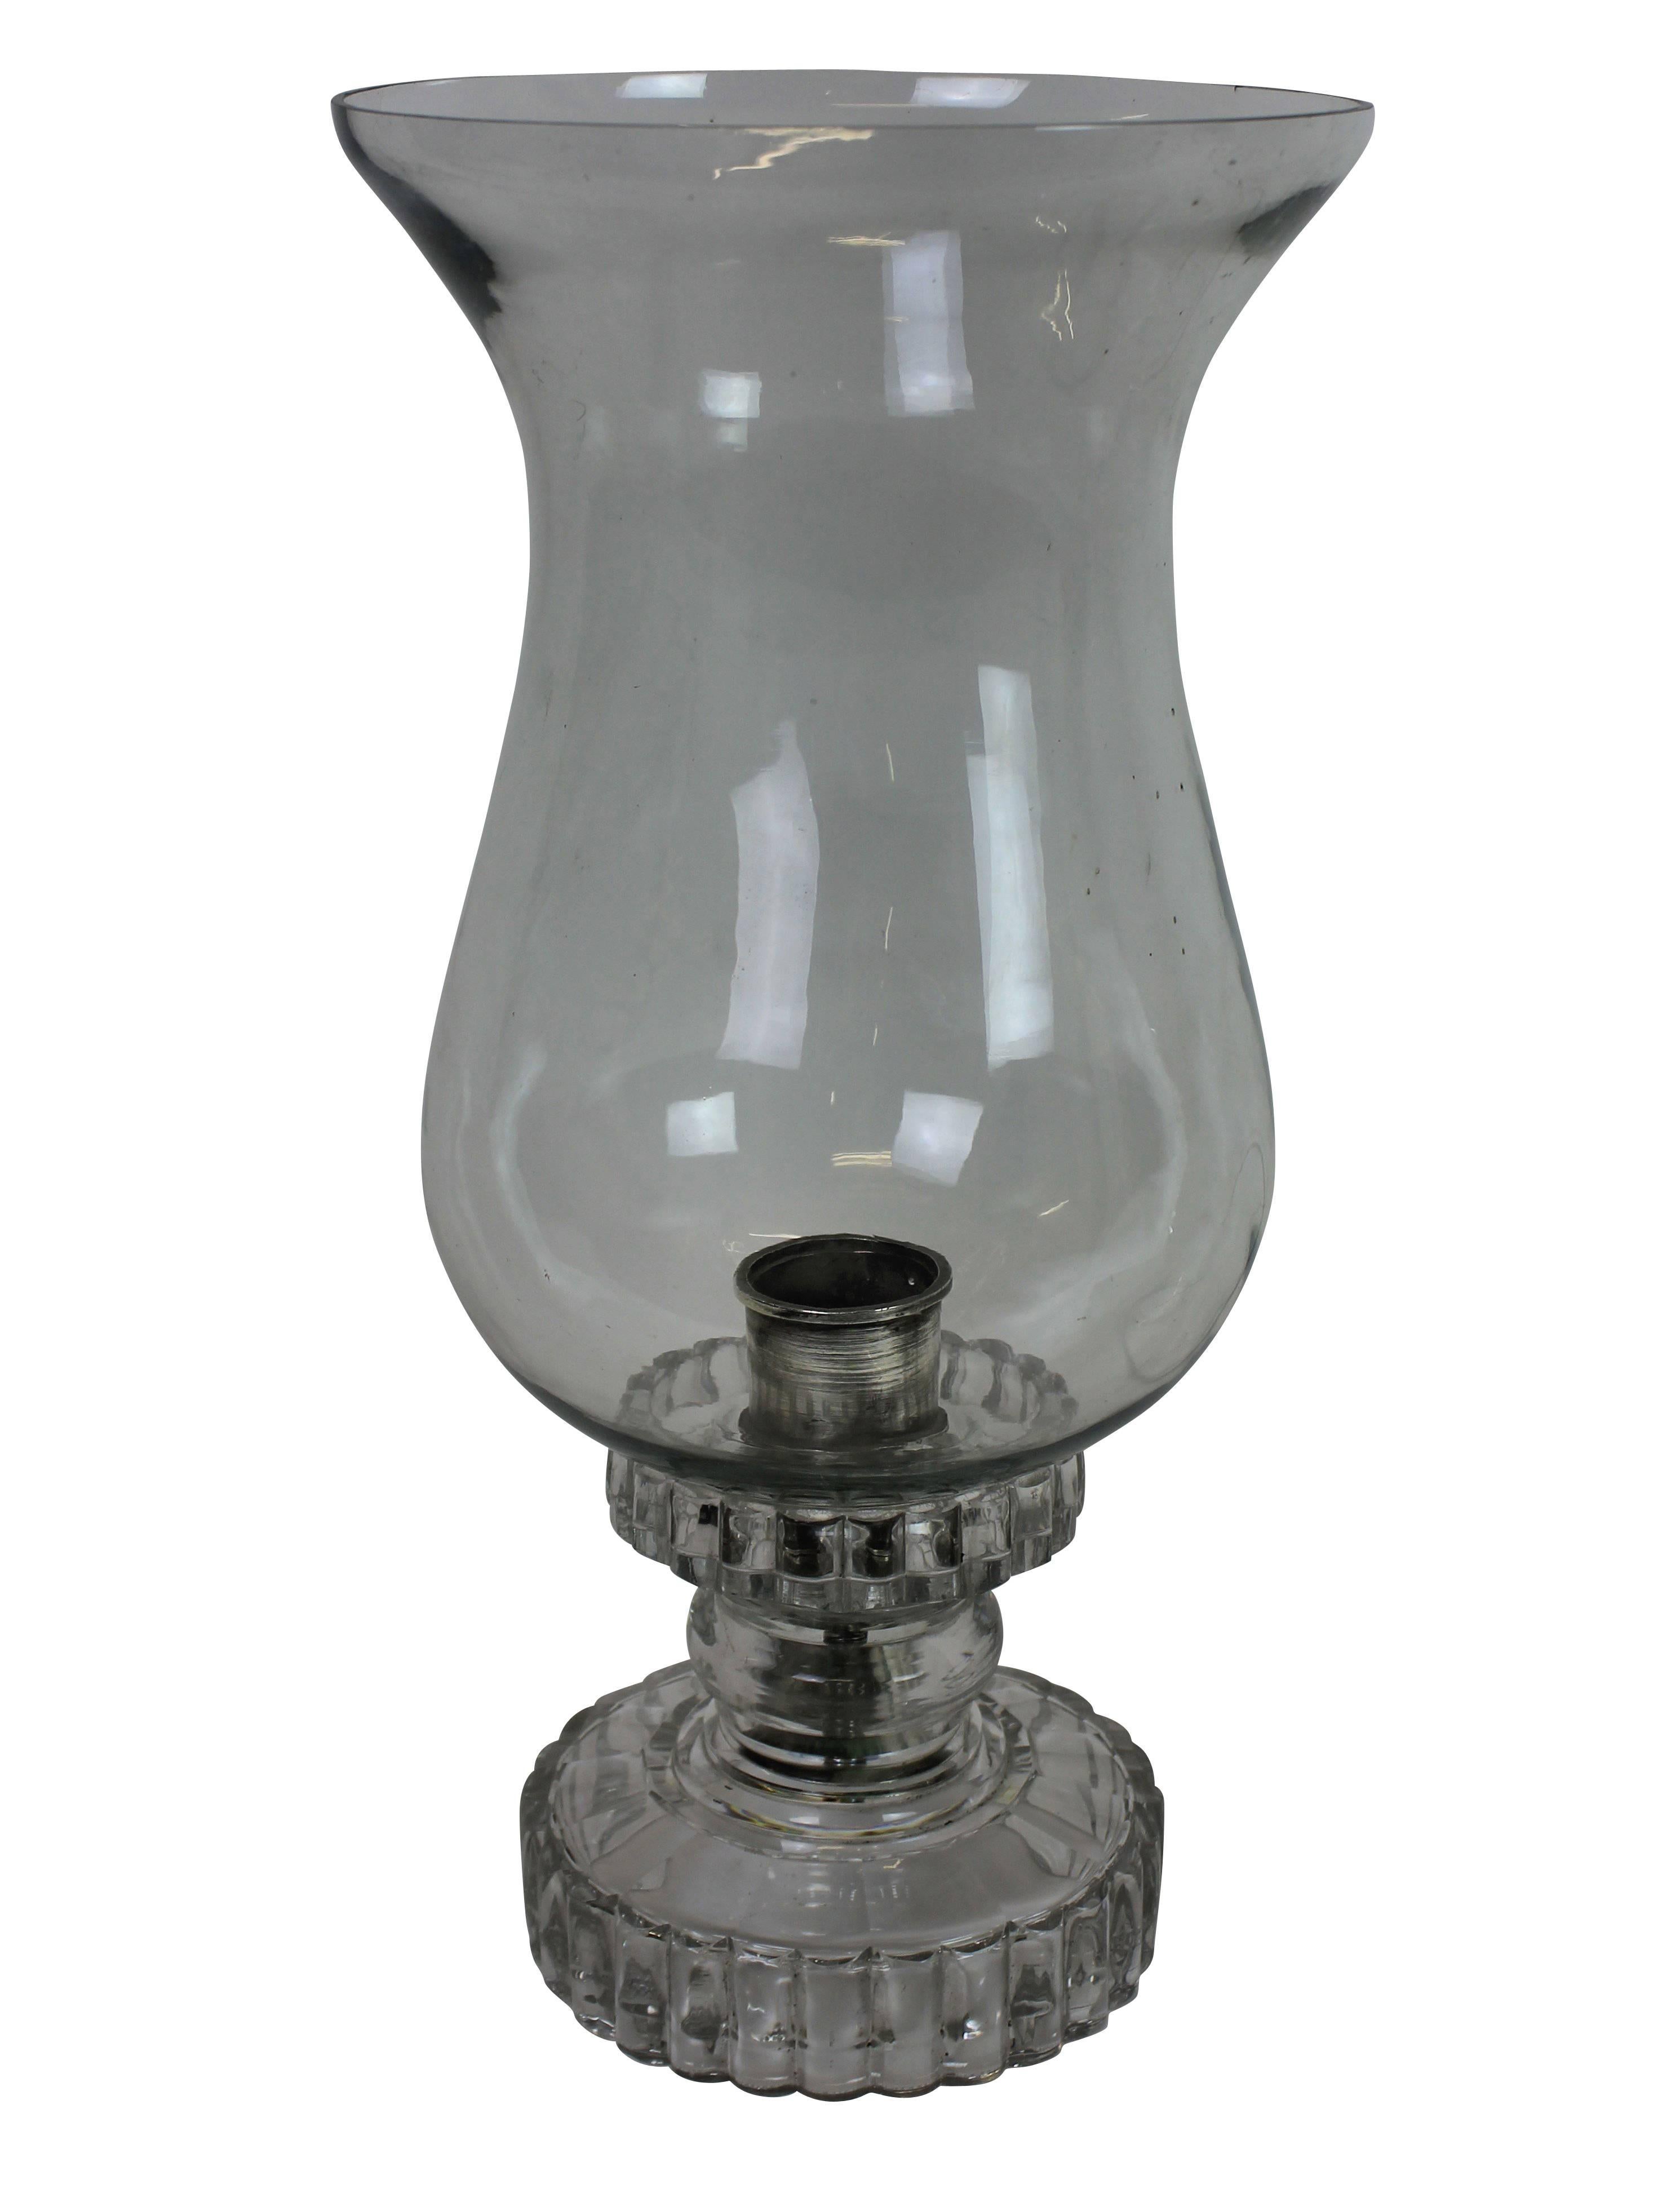 A large English George IV hurricane lamp. With a cut-glass base, silver plated candle fitting and large handblown shade.
 